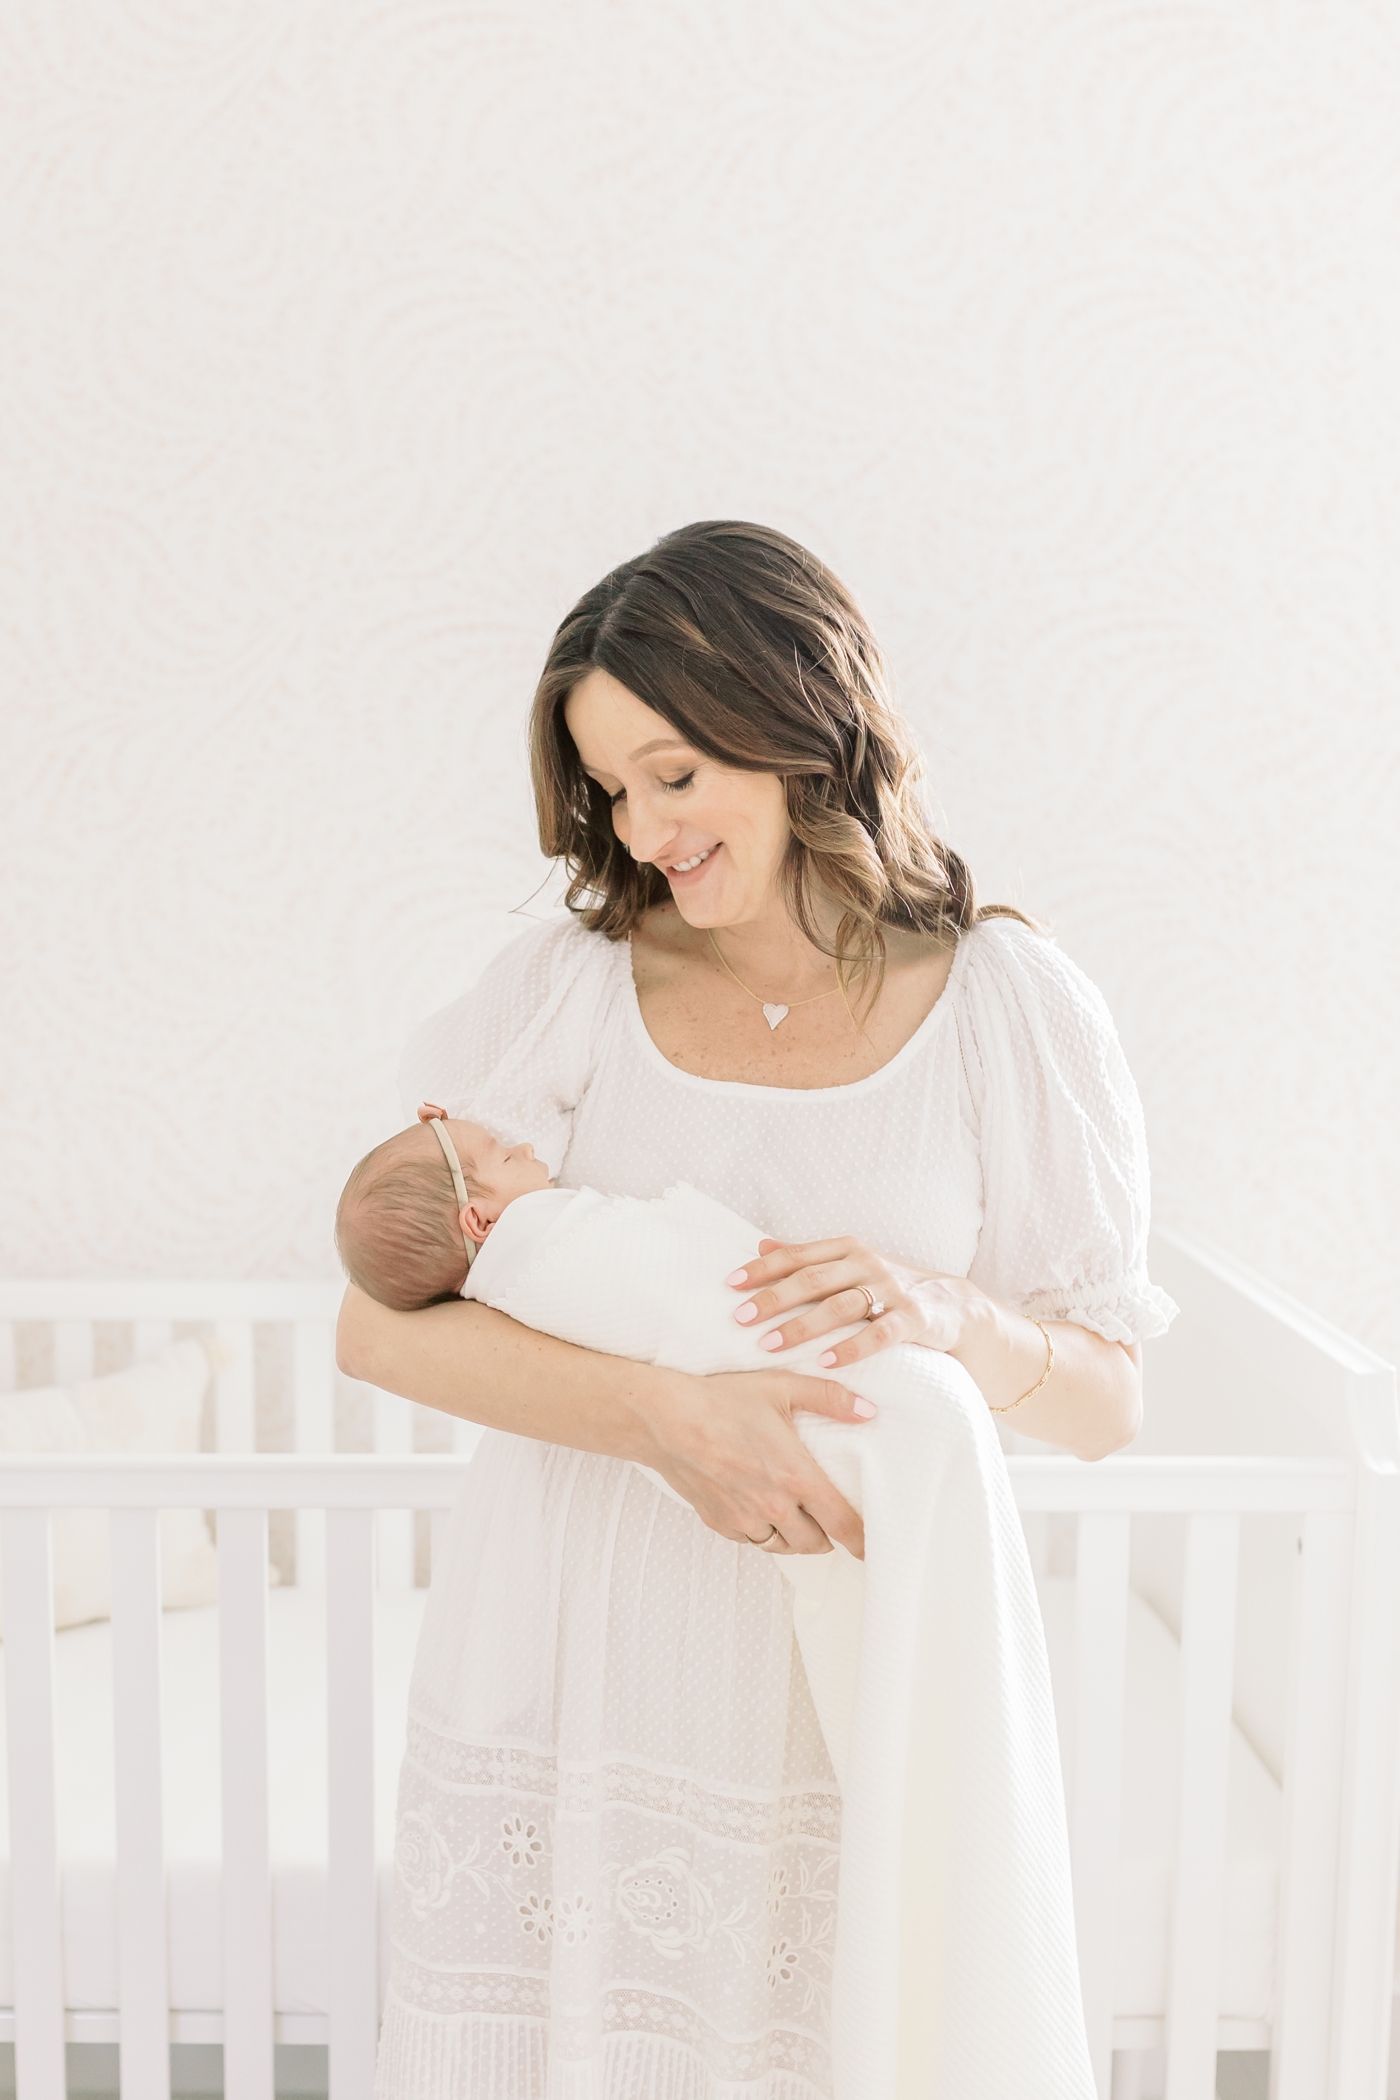 Mom in eyelet dress holding new baby during their lifestyle newborn session | Photo by Caitlyn Motycka Photography